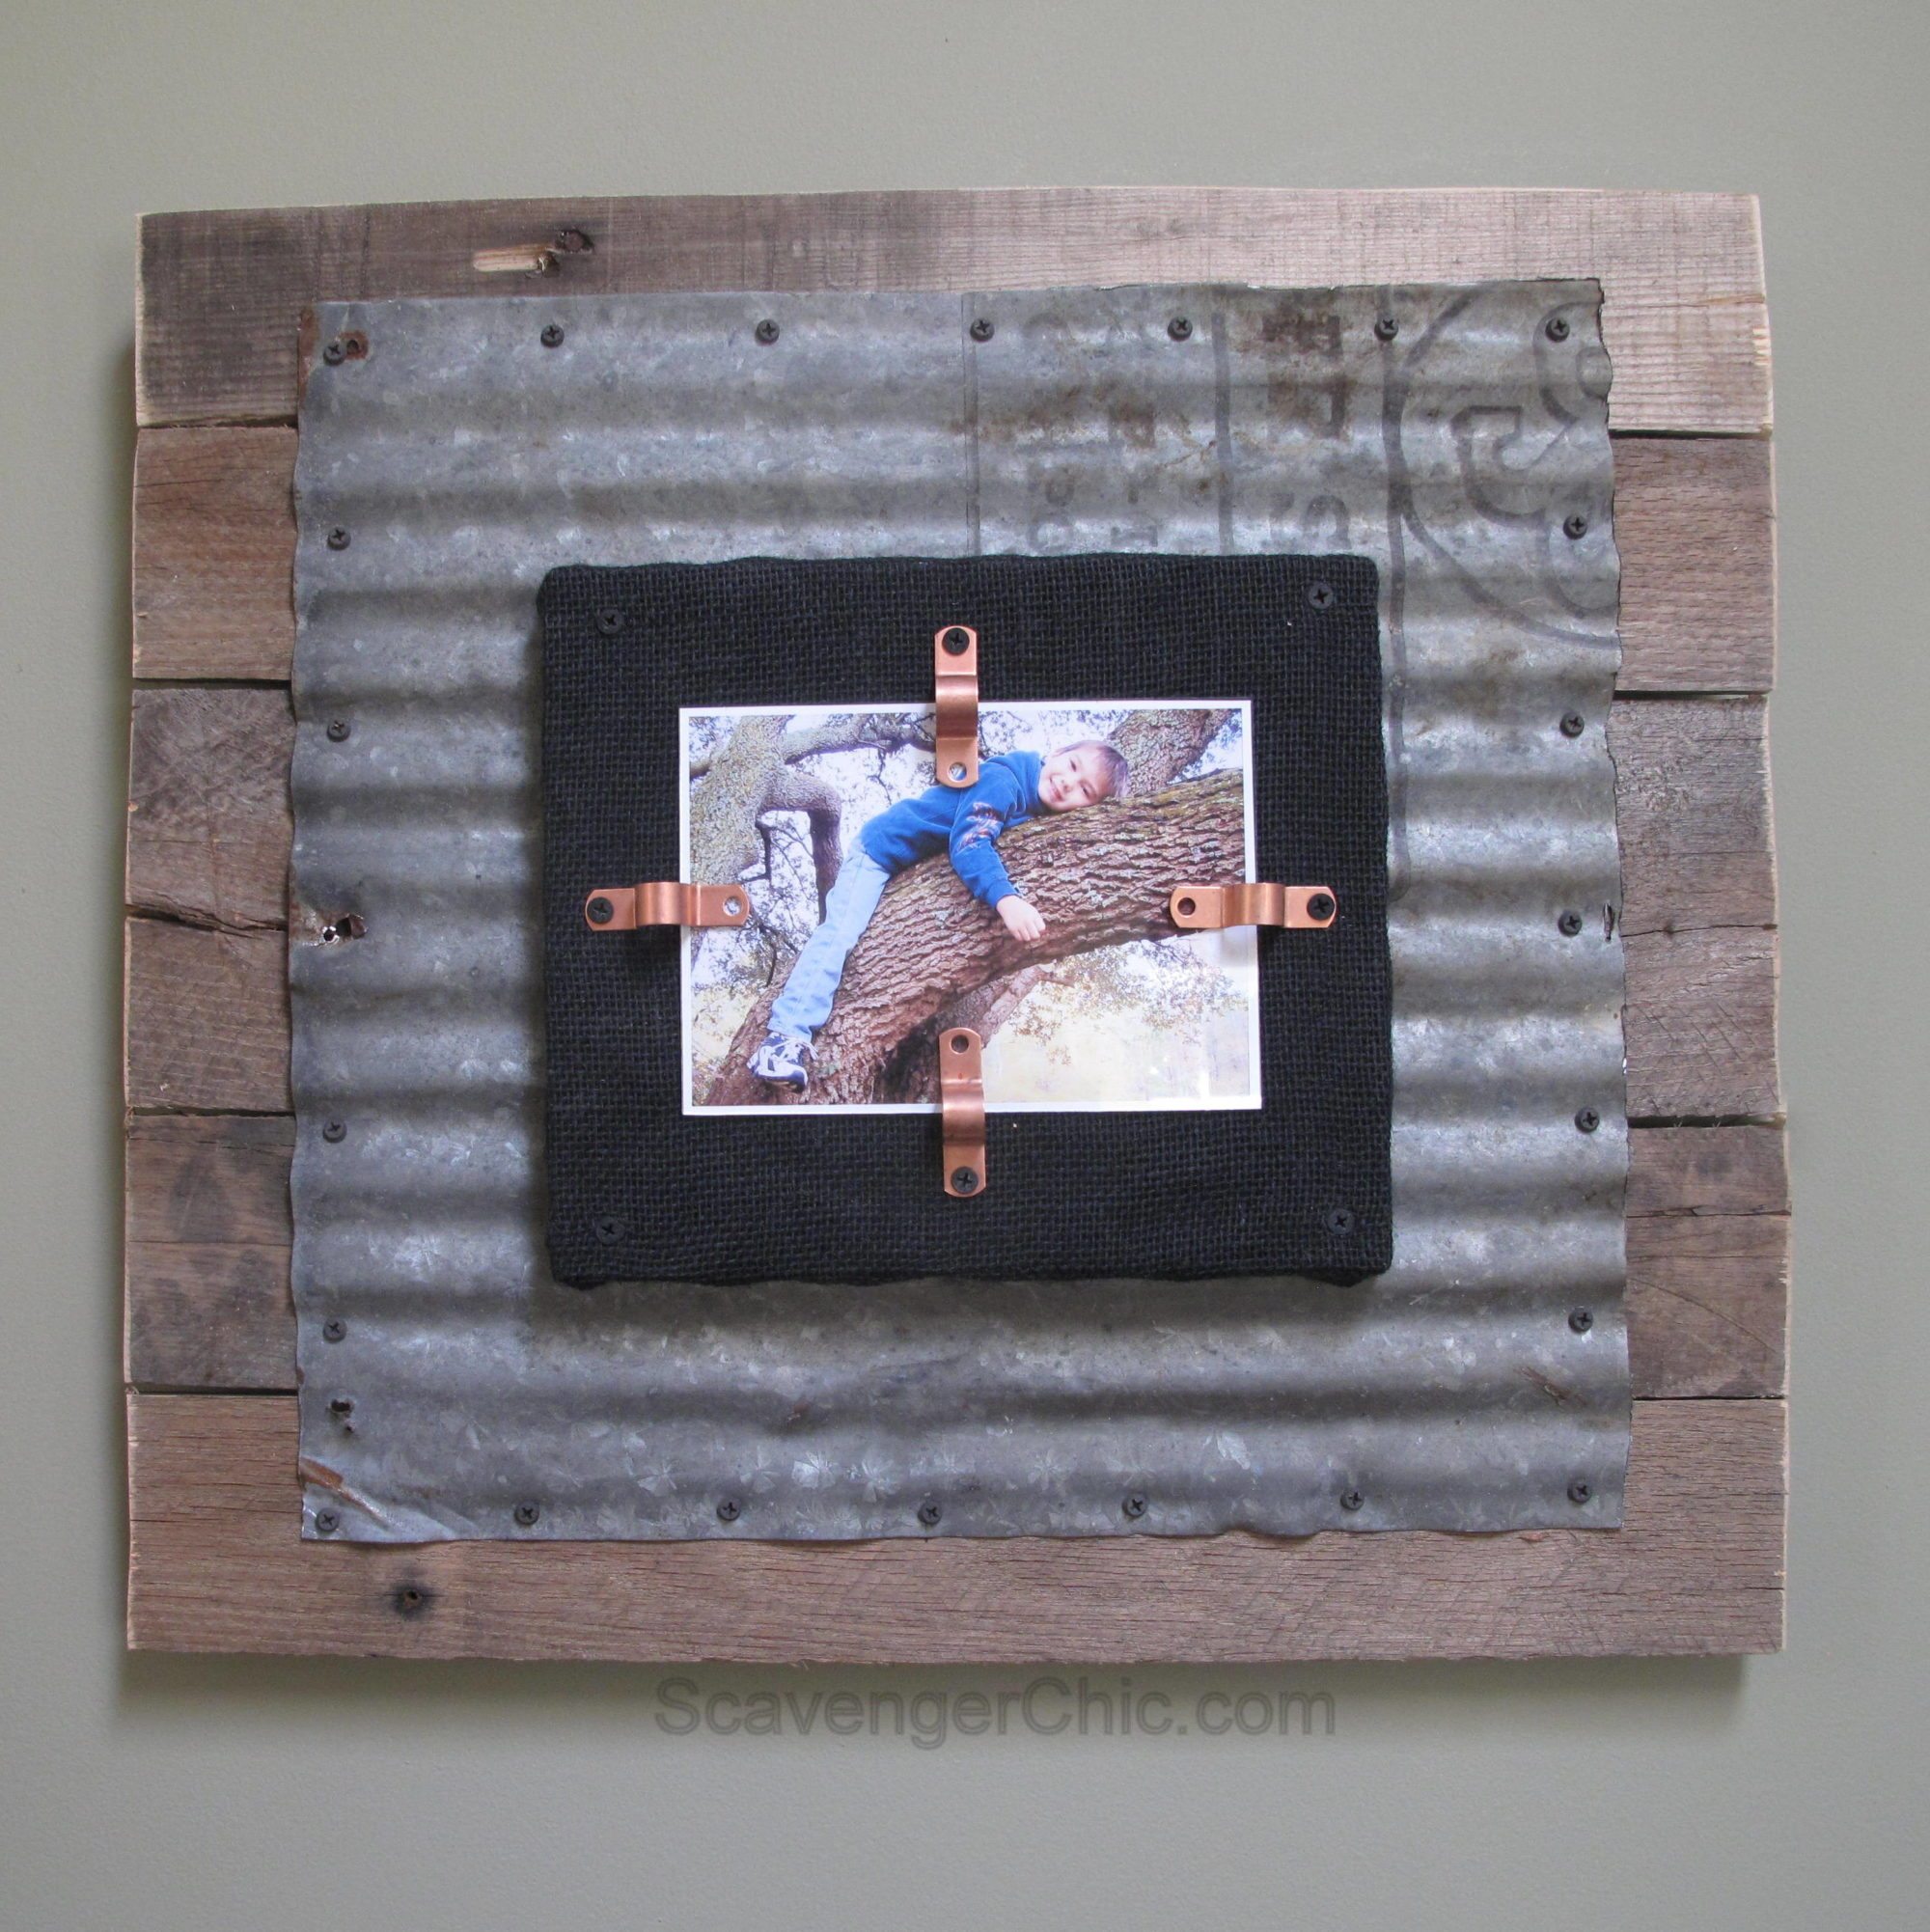 Corrugated Tin and Pallet Wood diy frame 014